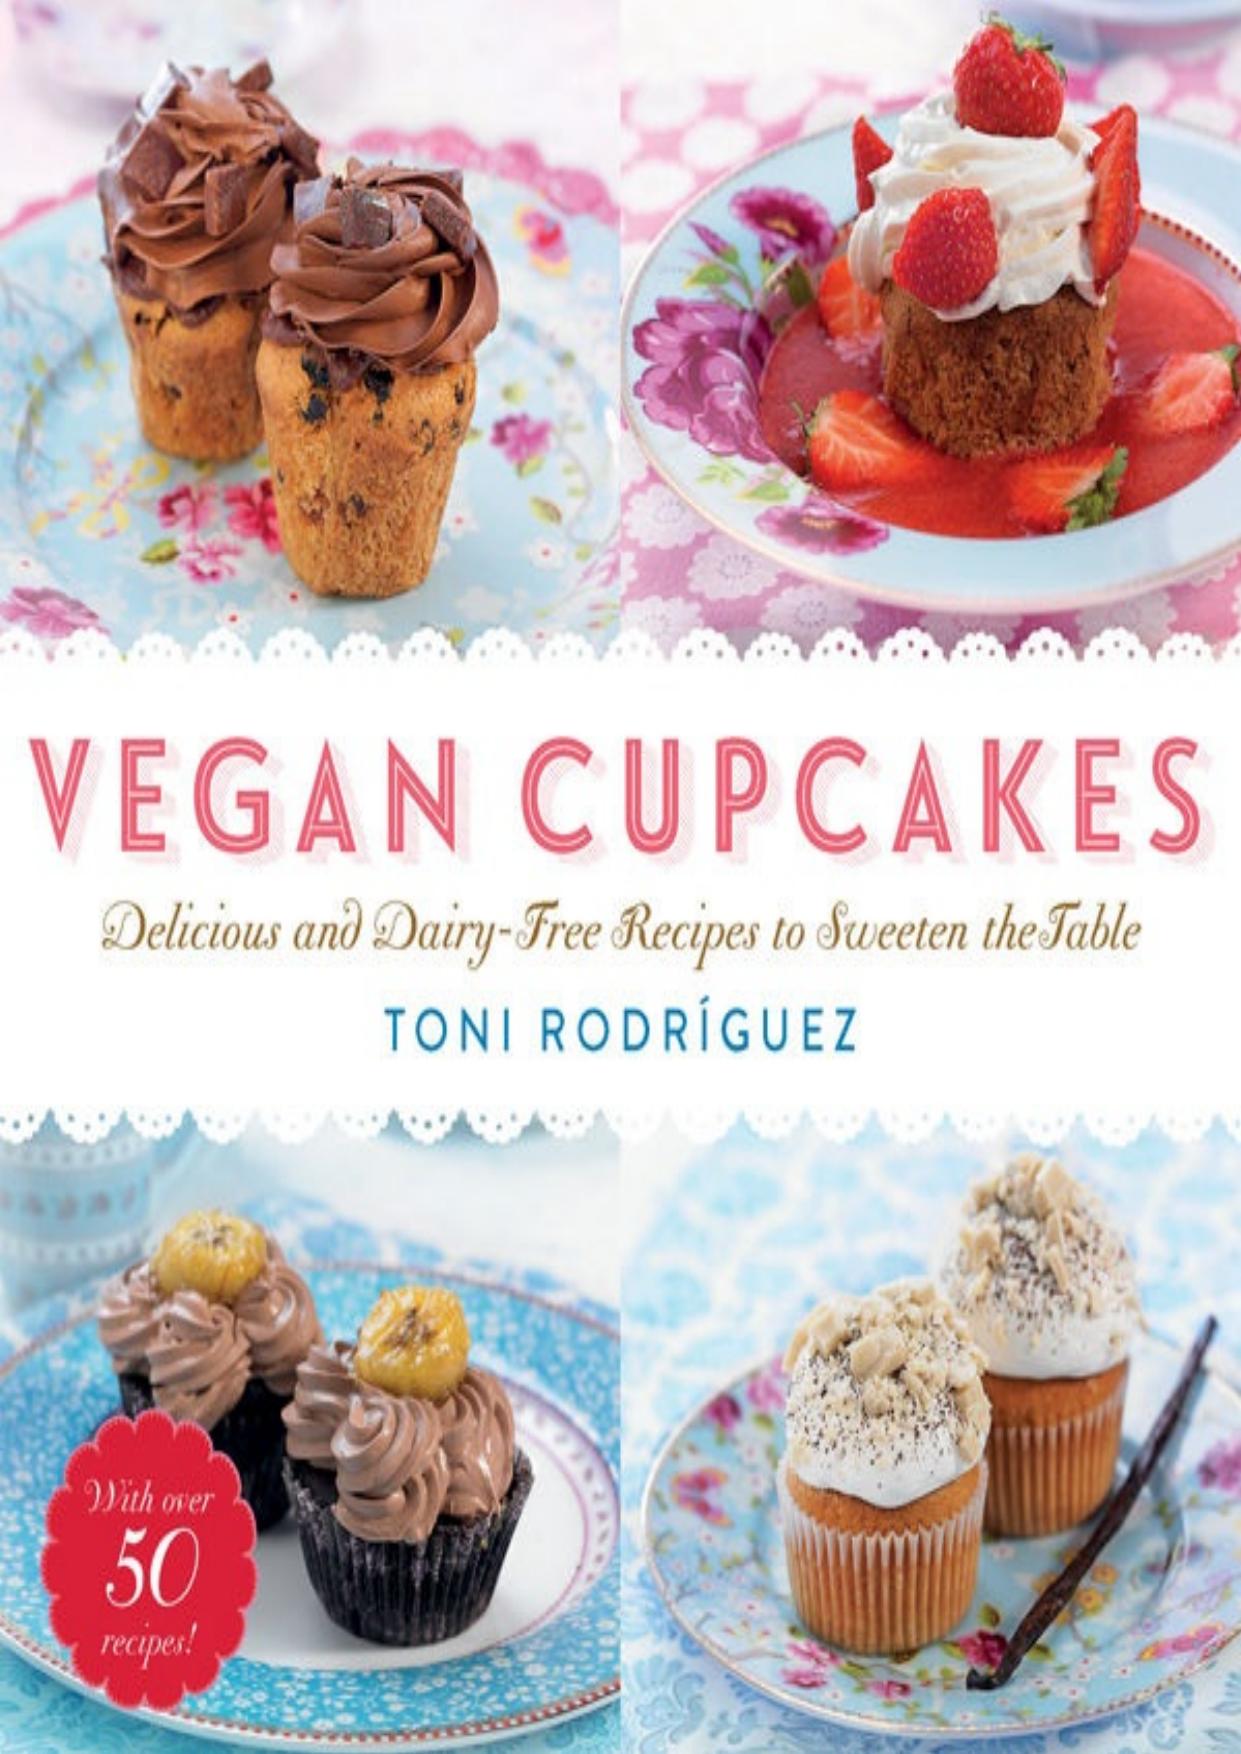 Vegan Cupcakes: Delicious and Dairy-Free Recipes to Sweeten the Table by Toni Rodríguez